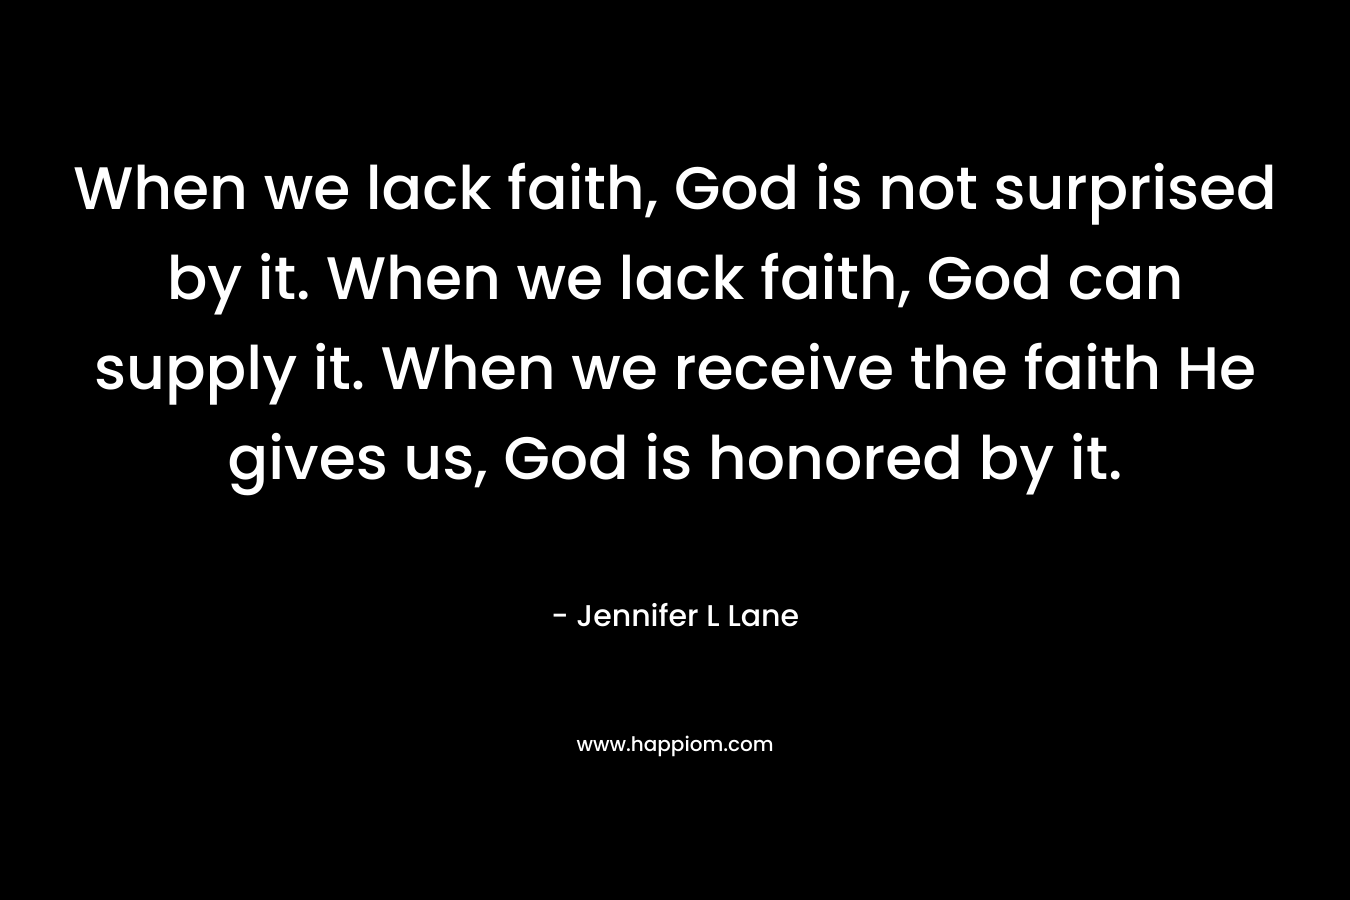 When we lack faith, God is not surprised by it. When we lack faith, God can supply it. When we receive the faith He gives us, God is honored by it. – Jennifer L Lane